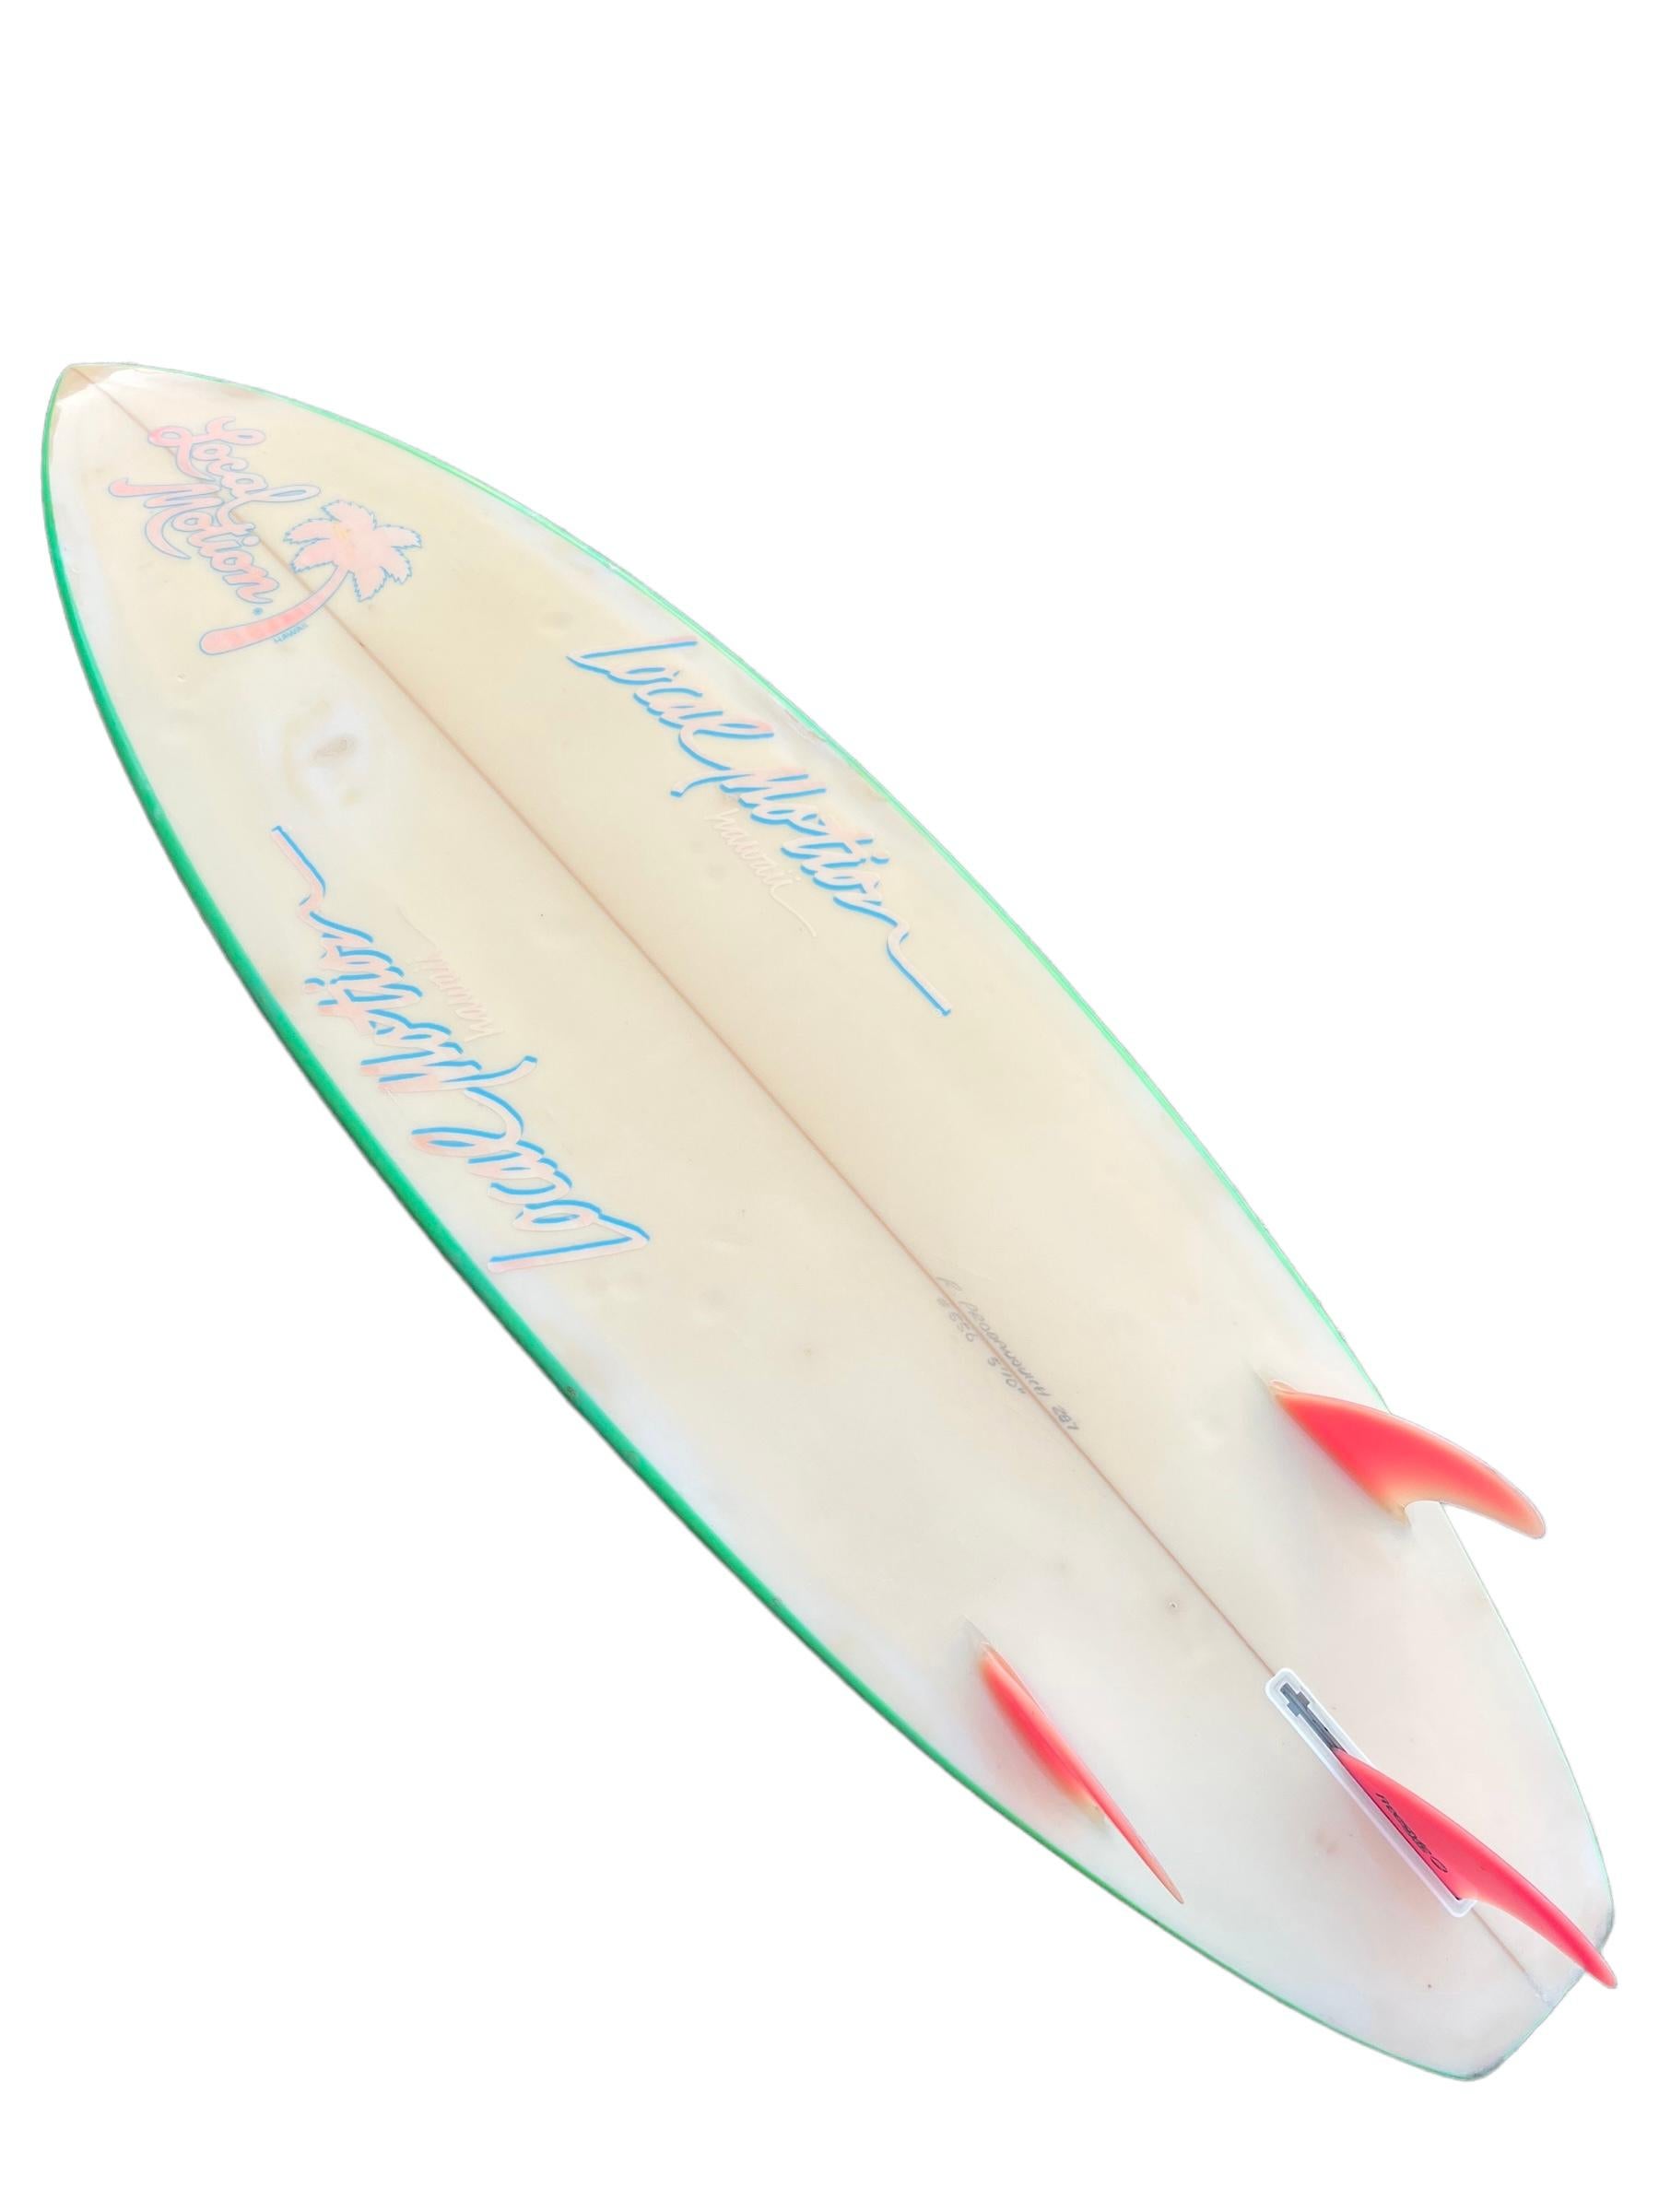 Mid-1980s Local Motion shortboard made by Robin Prodanovich. Features a retro 1980s neon island style airbrush with neon orange tri-fins. A unique example of a Local Motion surfboard with swaying palm trees and bright colors indicative of the 1980s.